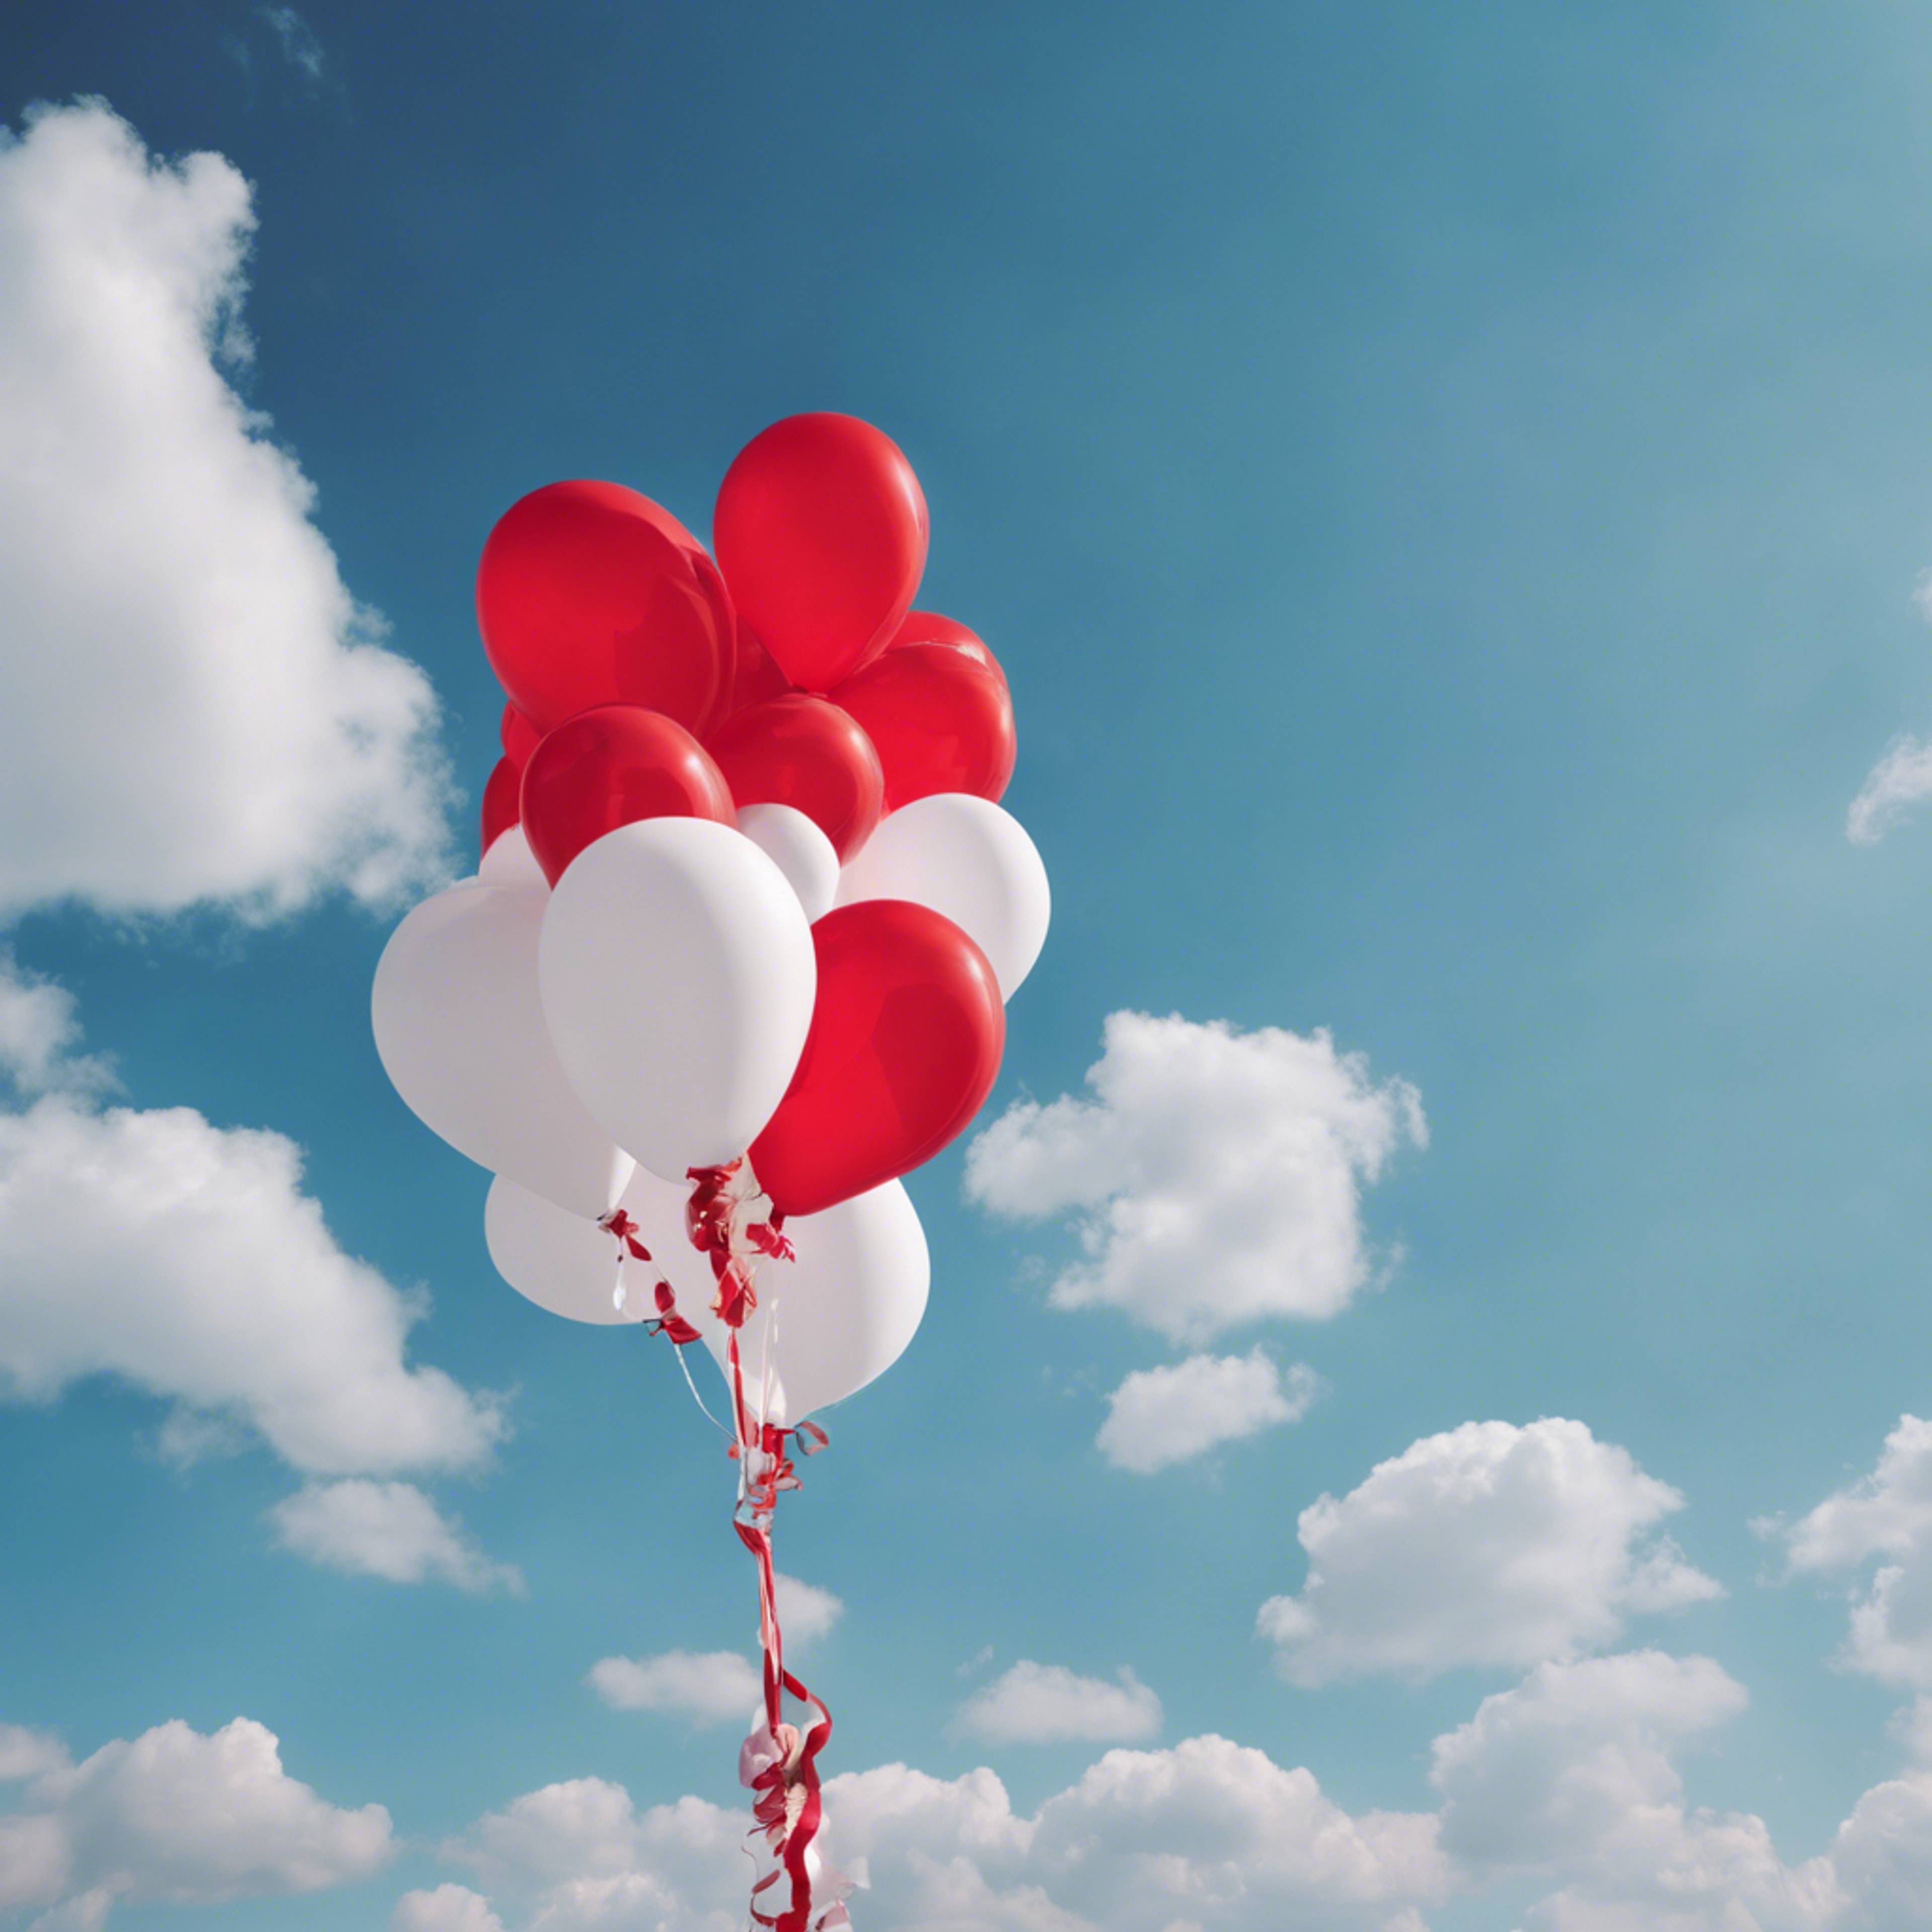 Festive red and white balloons strung together against the blue sky. ផ្ទាំង​រូបភាព[5b7b2fc281444a4c8d70]